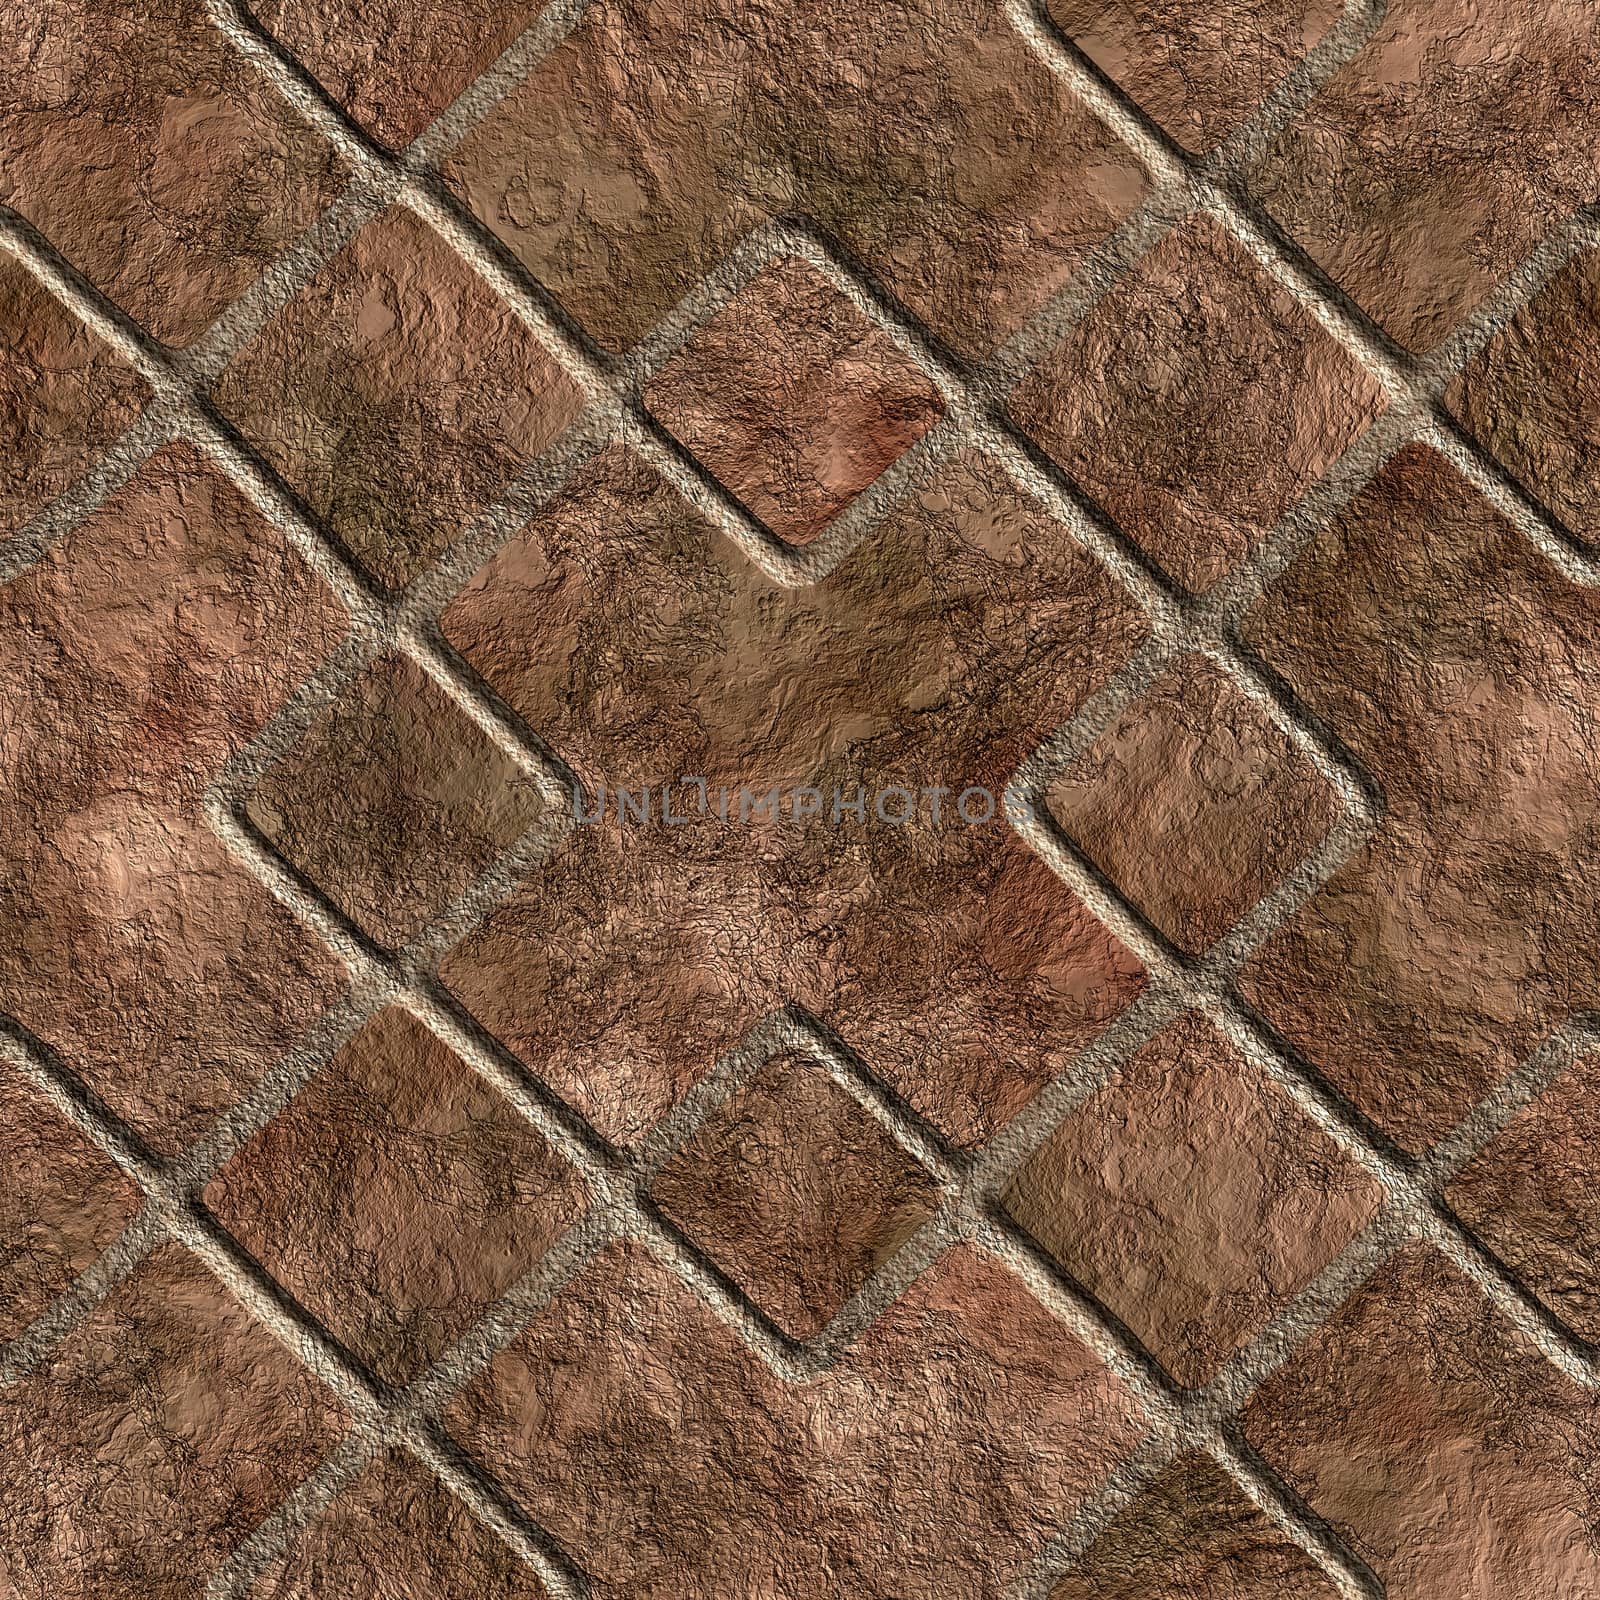 seamless tileable decorative background pattern